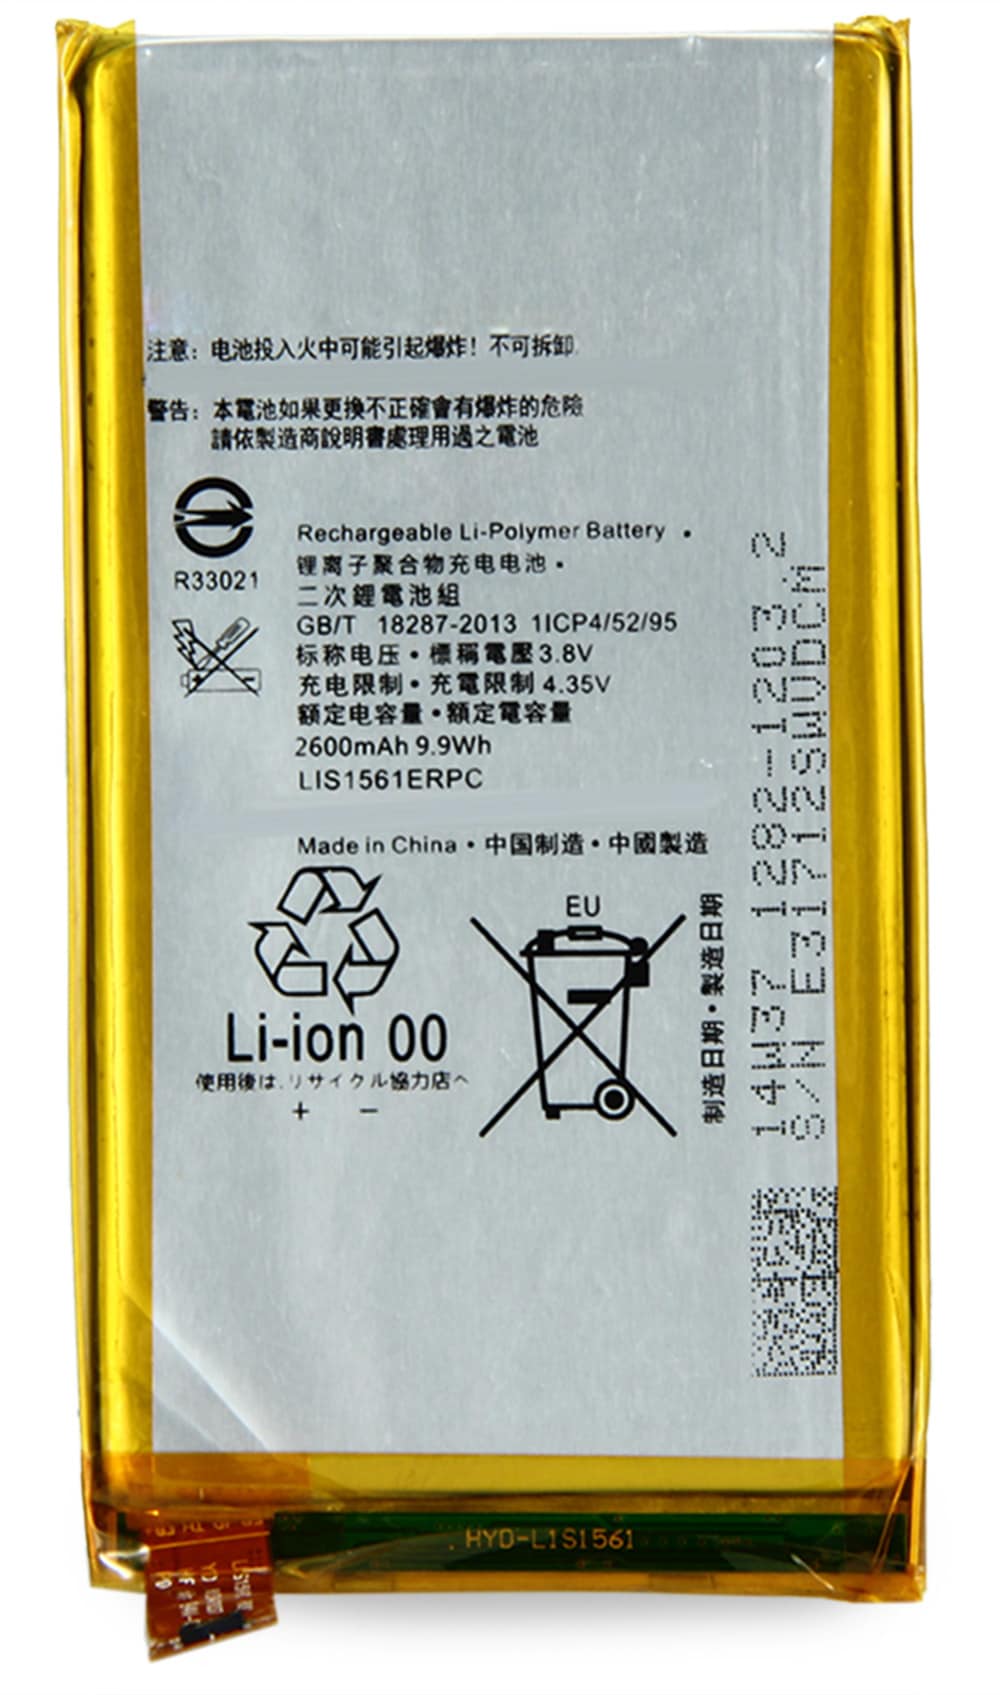 2600mAh Li-ion Battery Replacement for Sony Xperia Z3 mini Compact M55W D5833- White